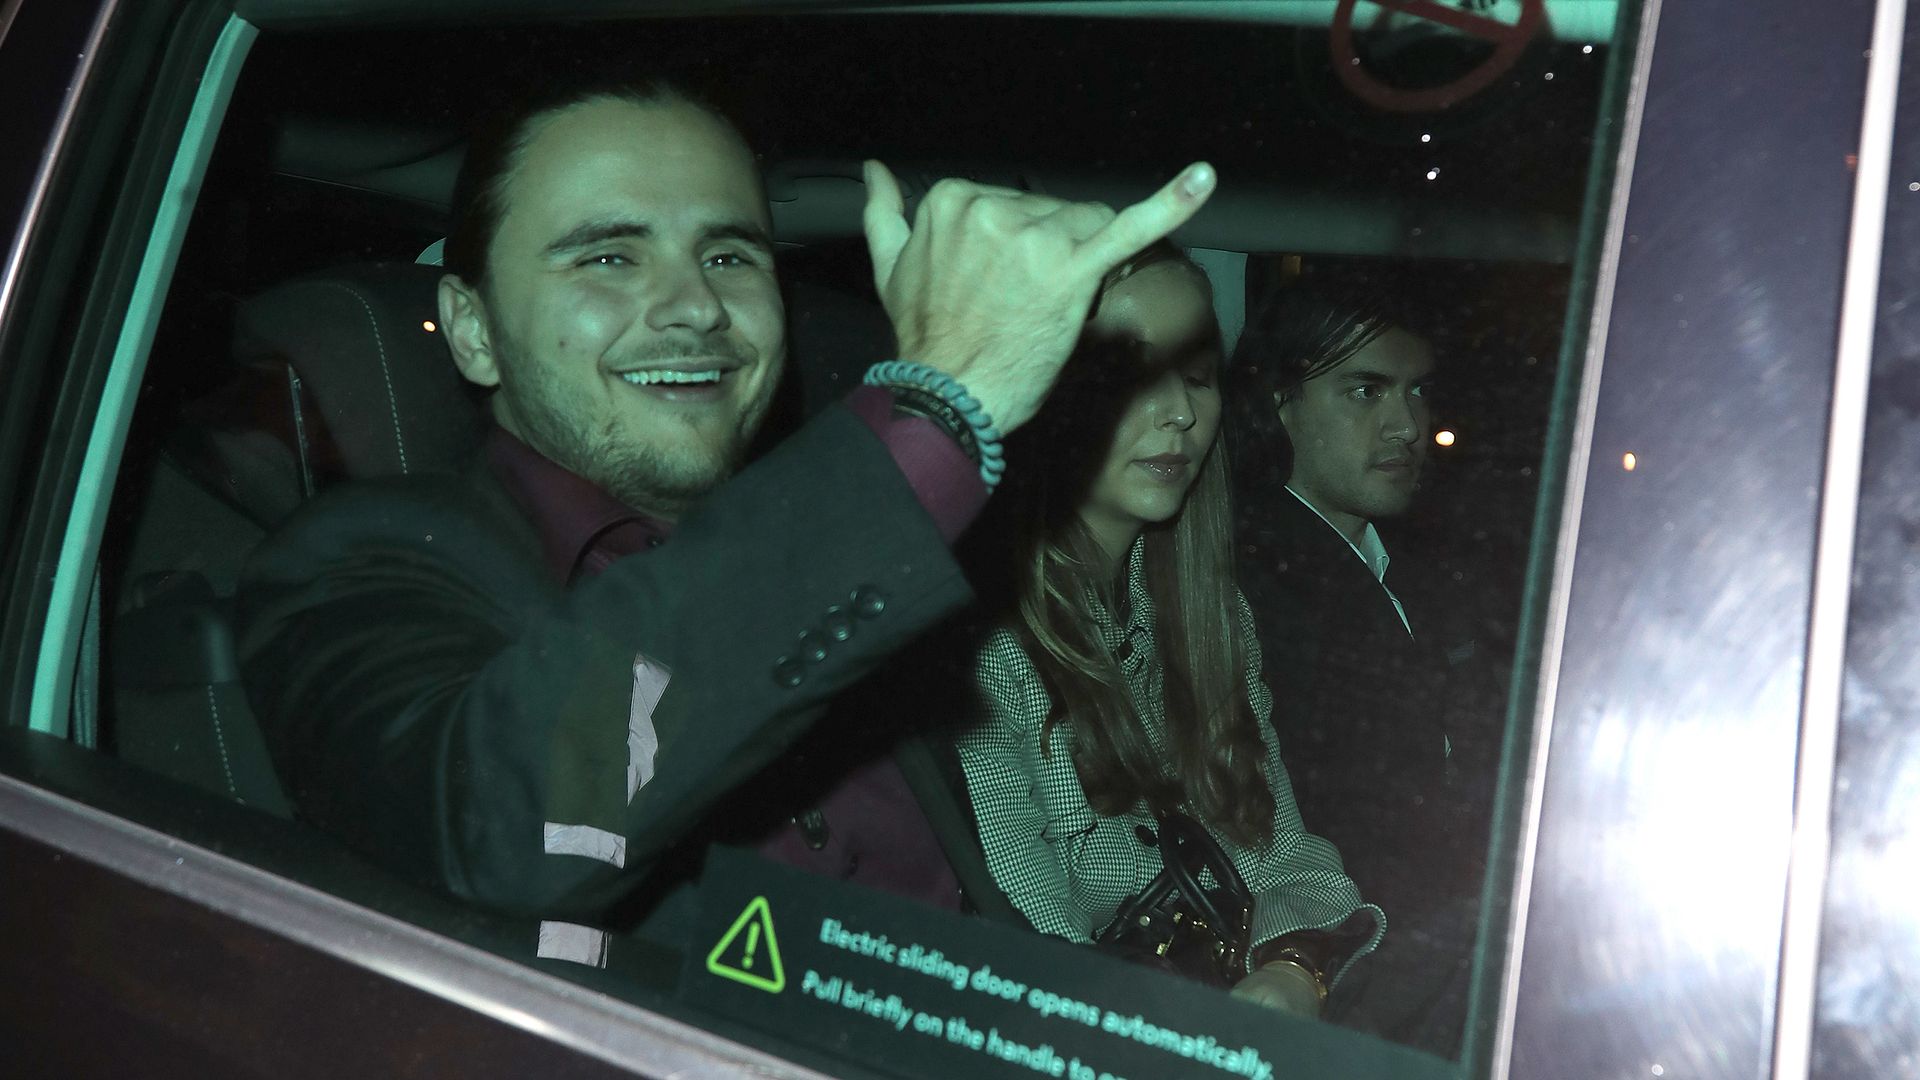 Michael Jackson's son Prince Jackson looks so different in new photos